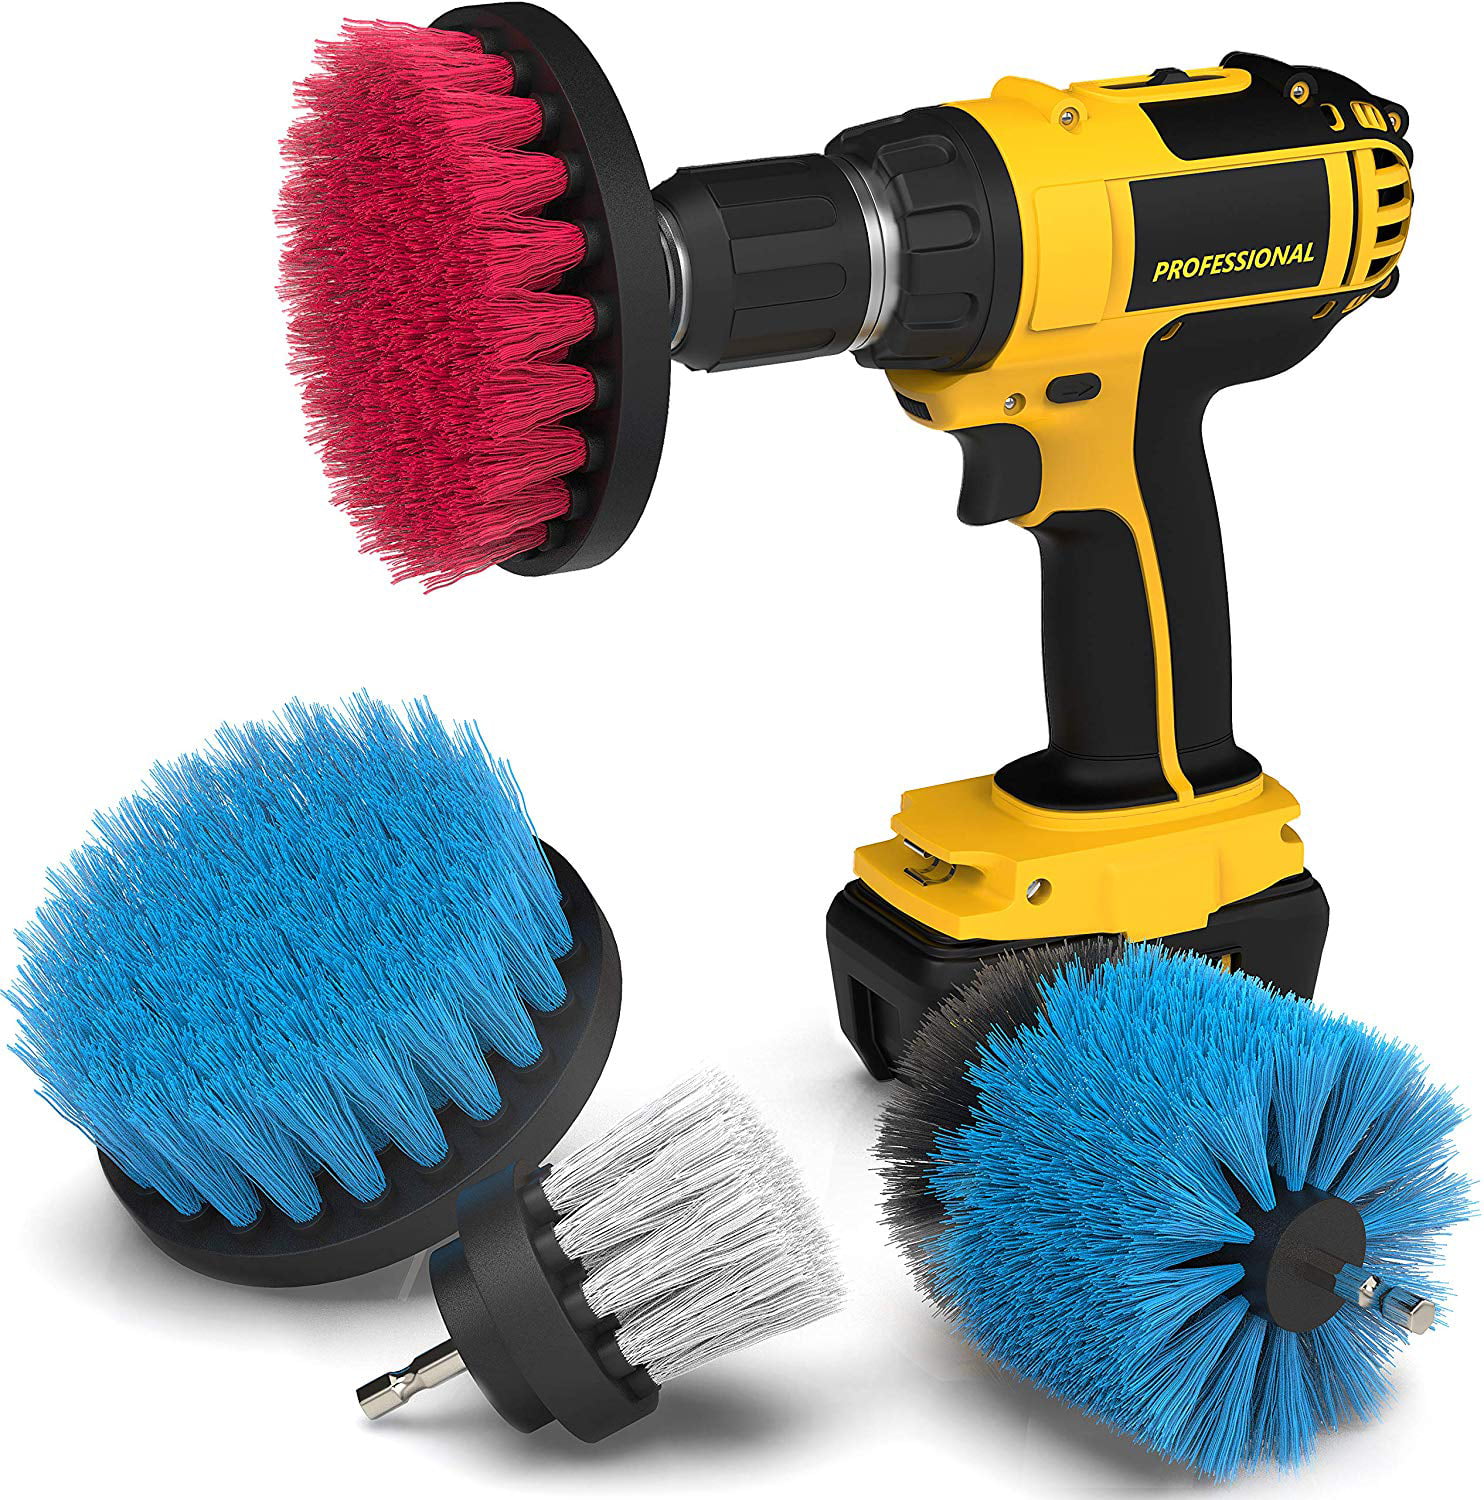 Dropship Electric Brush Cleaning Tools Useful Things For Home Bathroom Mat Bathtub  Brushes Kitchen Sink Clean Tool Set Turbo Drill Brush to Sell Online at a  Lower Price